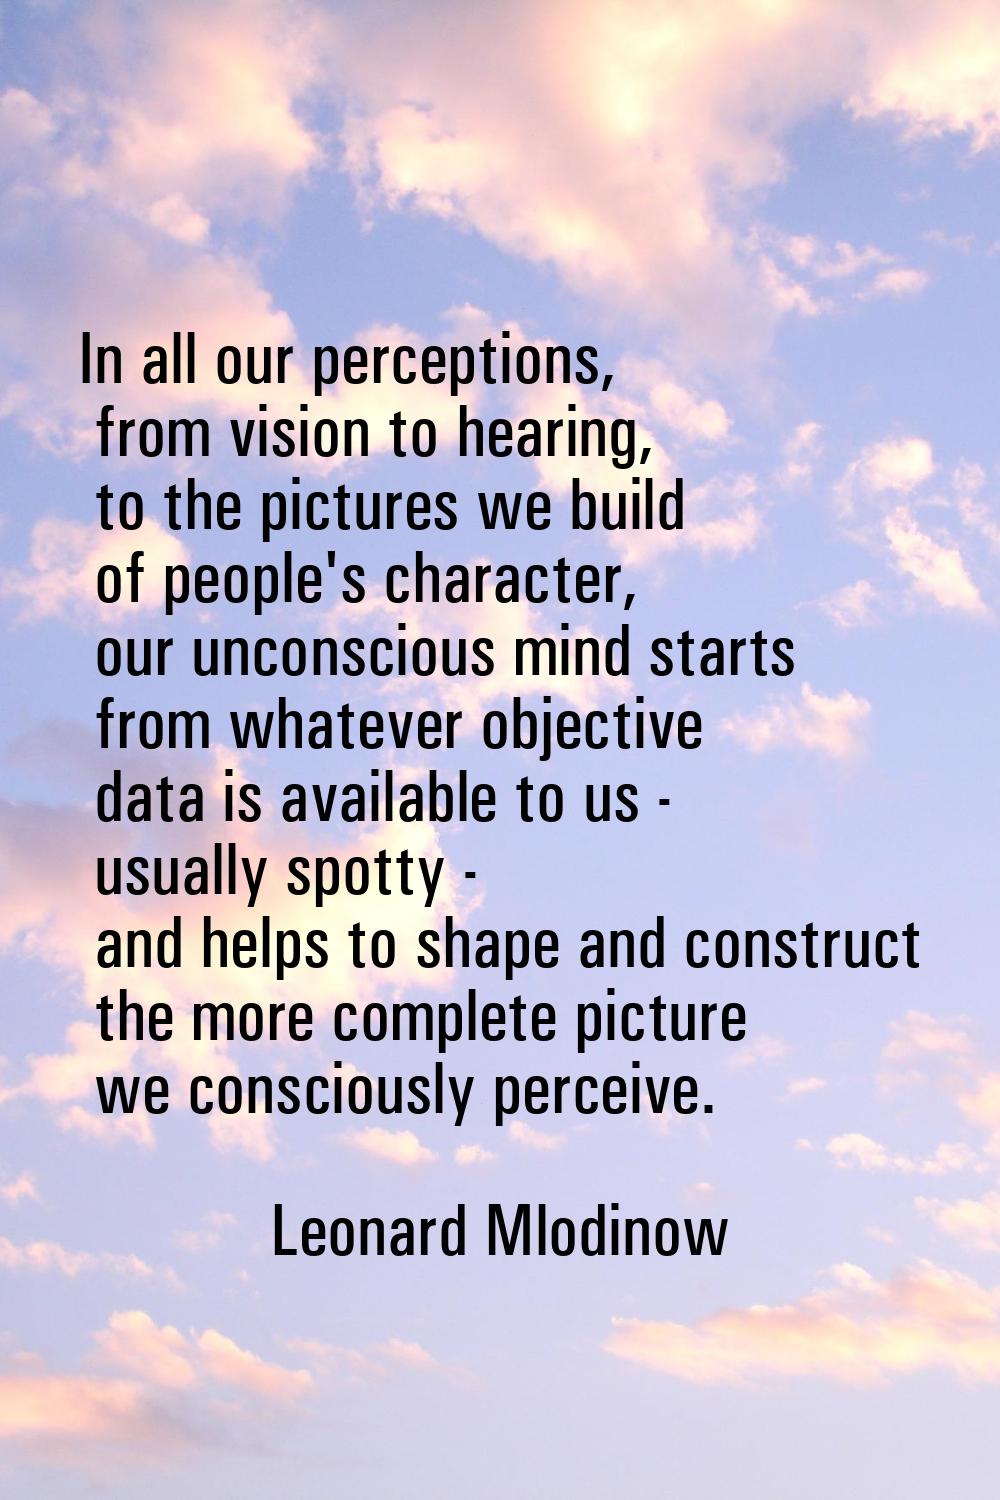 In all our perceptions, from vision to hearing, to the pictures we build of people's character, our